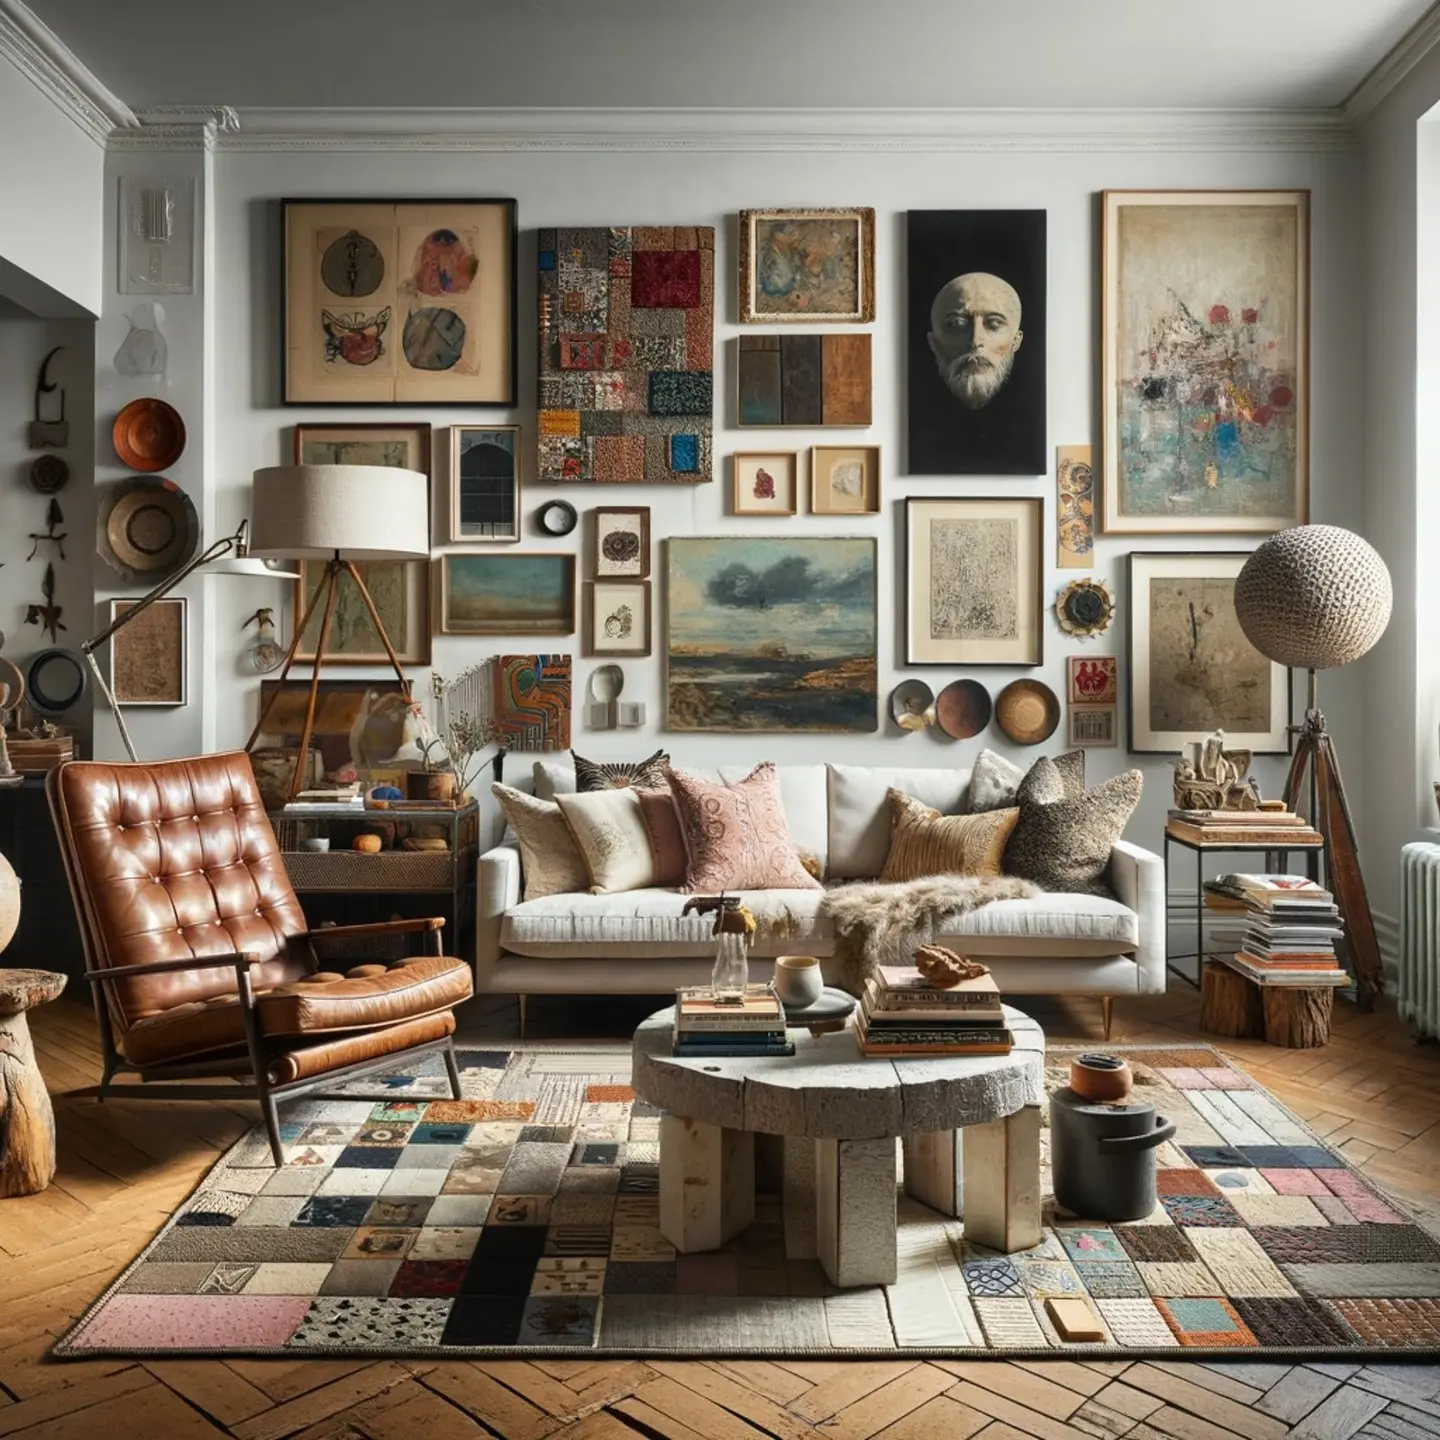 mixing patterns and textures is common in eclectic interiors such as this living room.